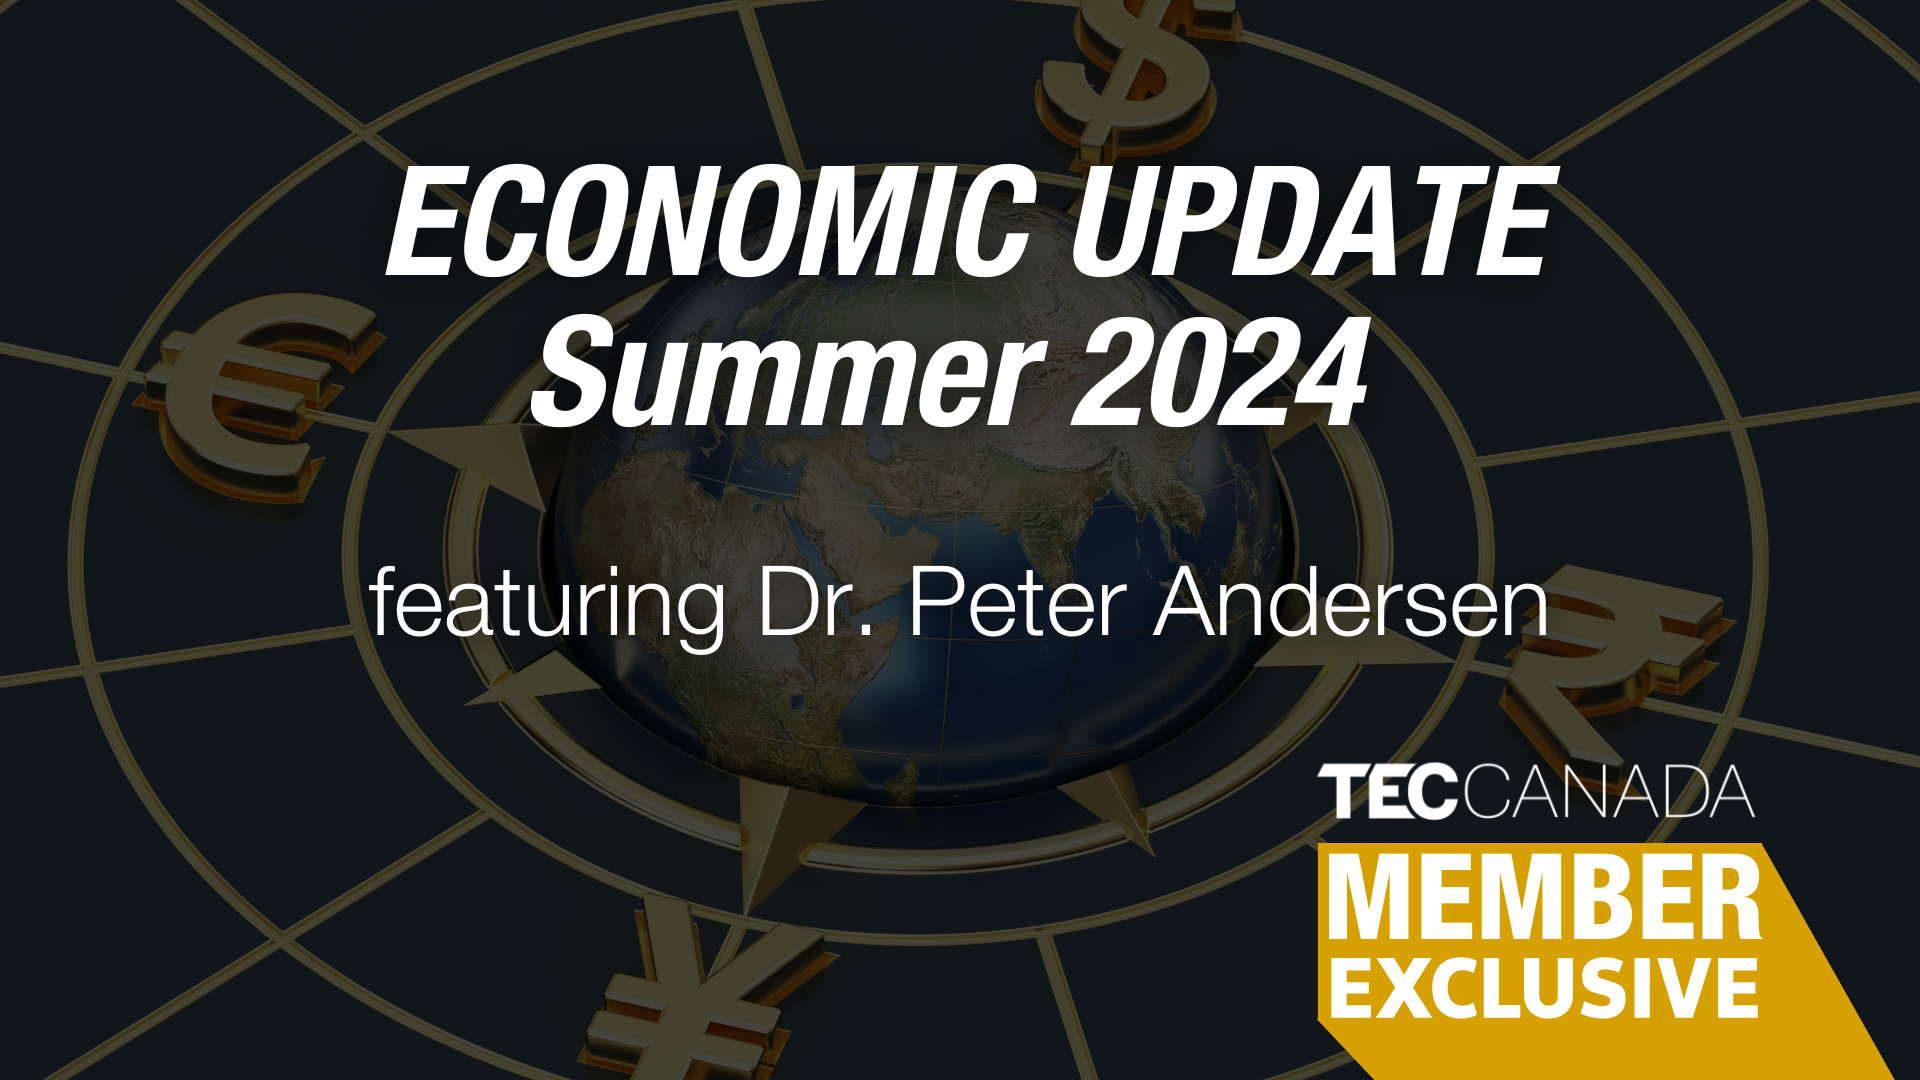 Join TEC Canada President & CEO, Todd Millar, as he hosts a discussion with Dr. Peter Andersen about the results of our latest CEO Confidence Index survey—including where the economy is headed and what Canadian business leaders can do to prepare.